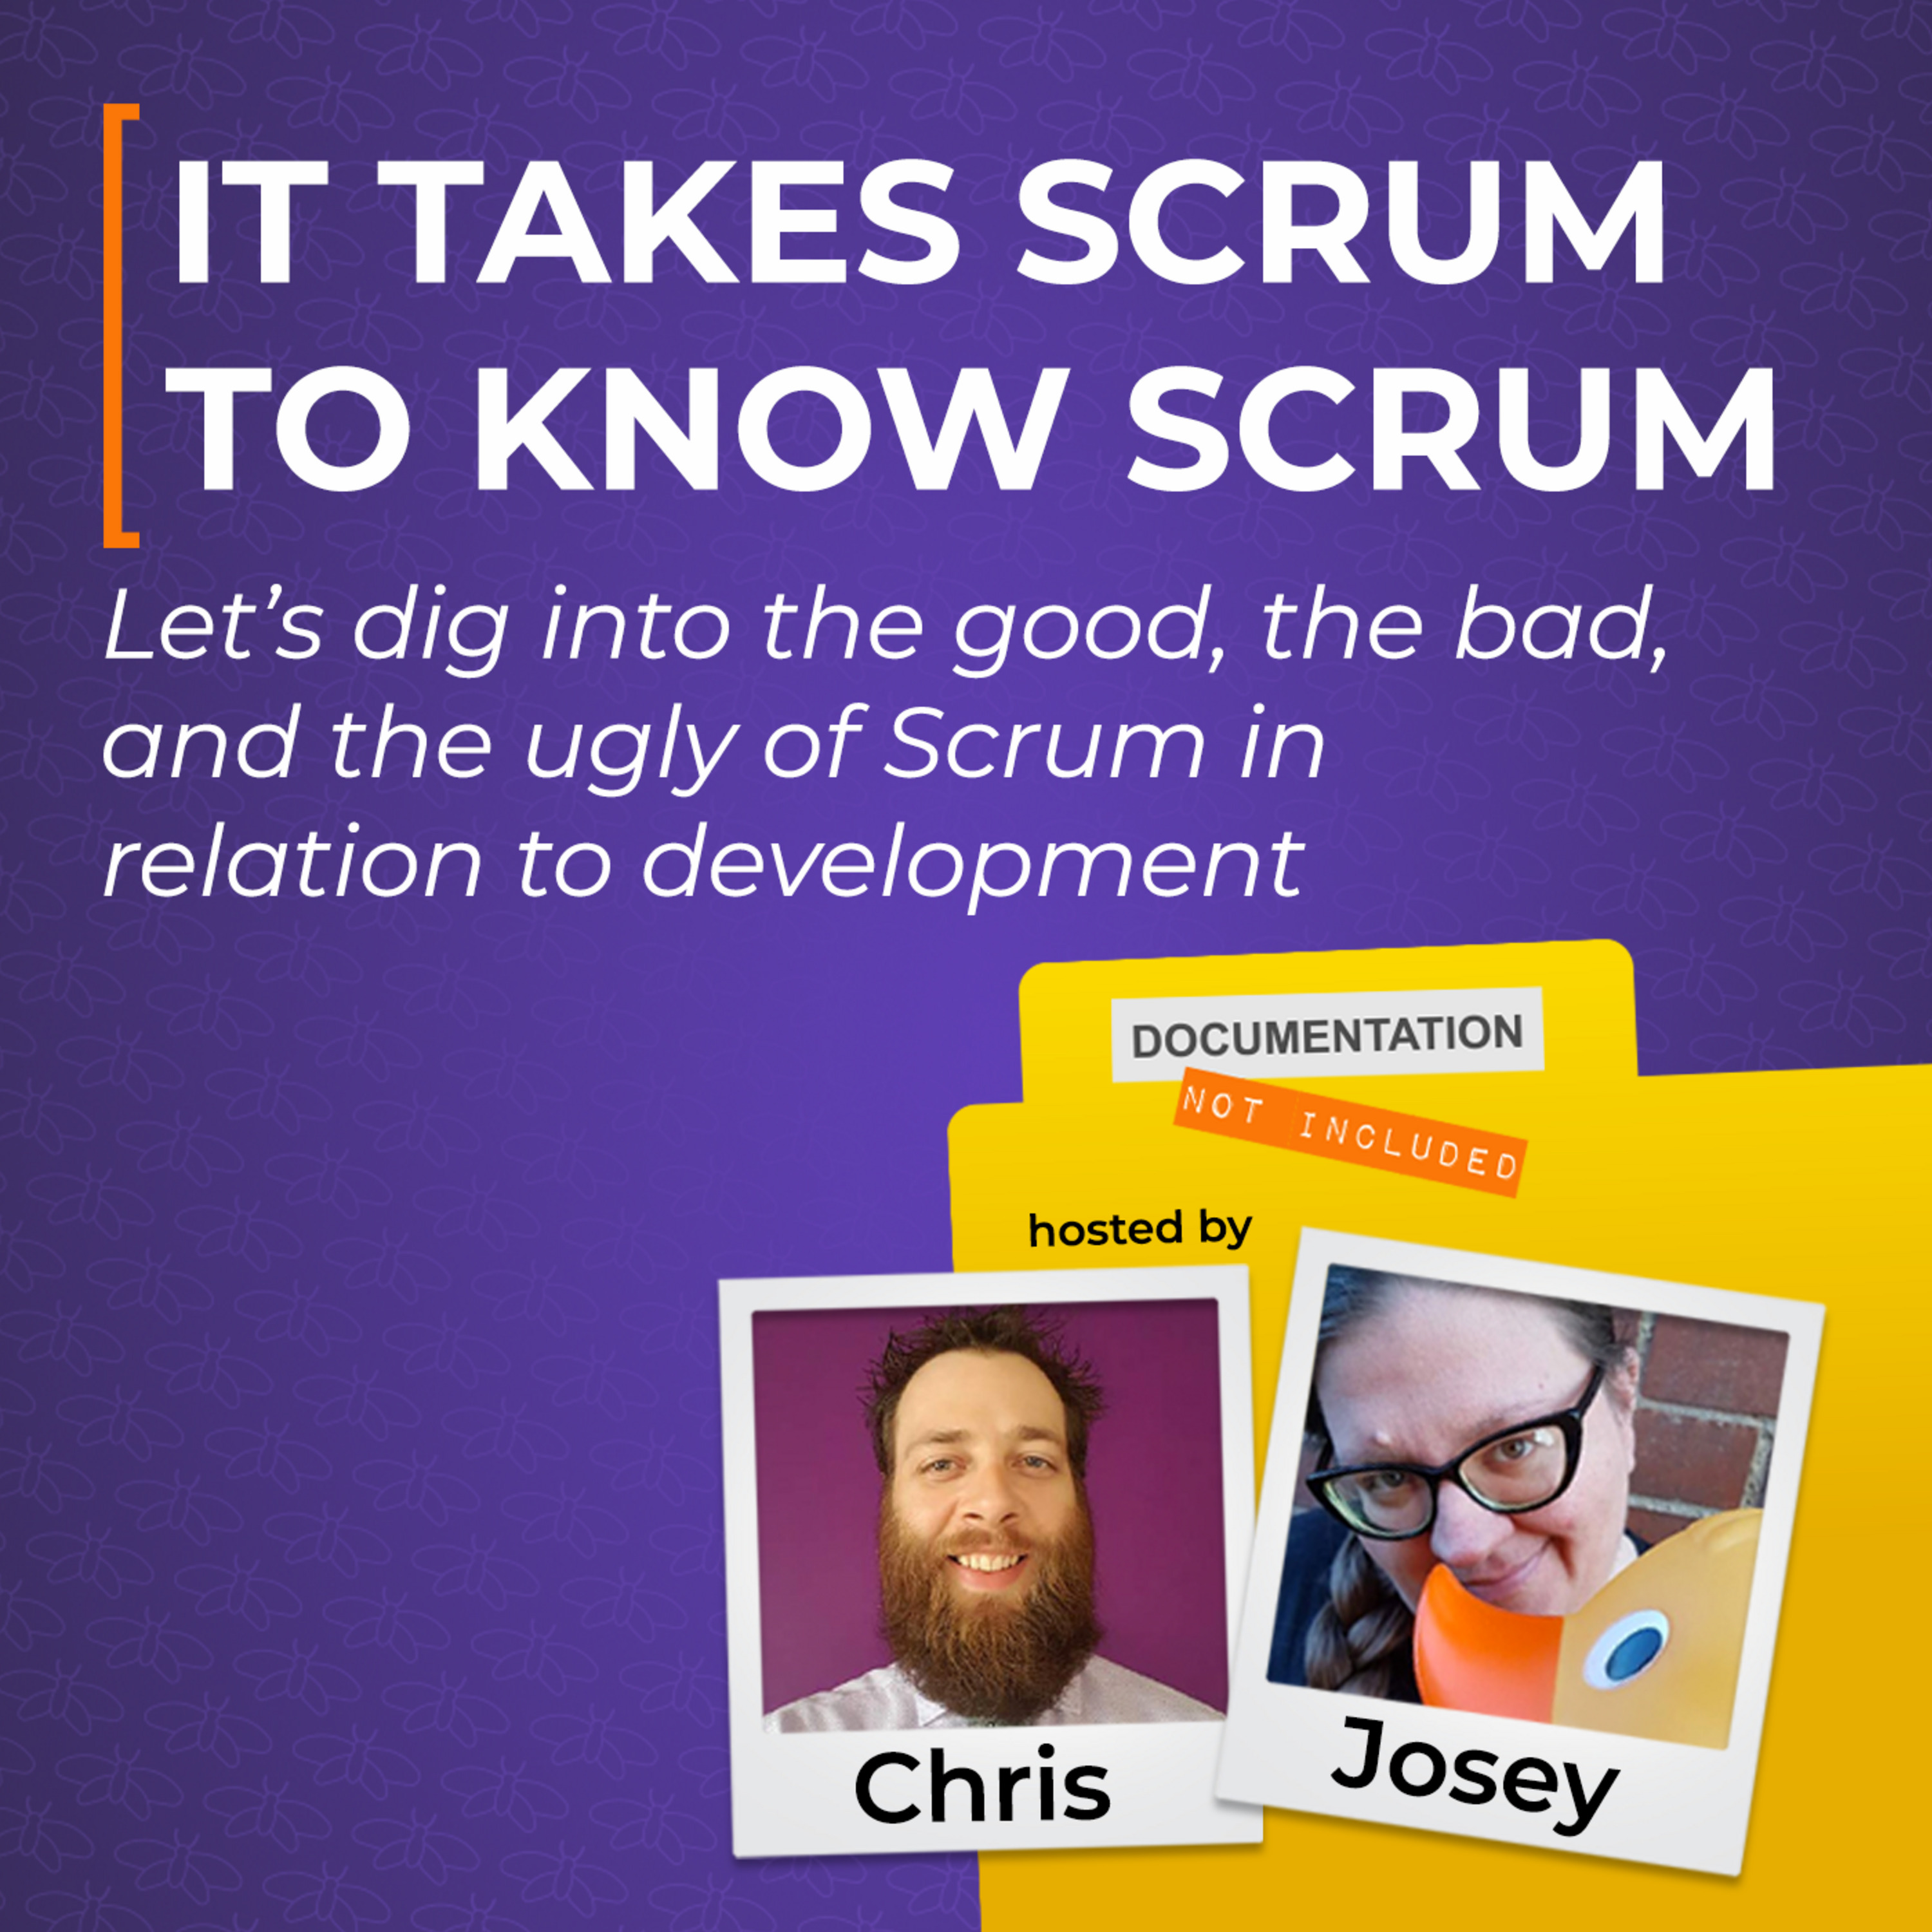 It takes Scrum to know Scrum